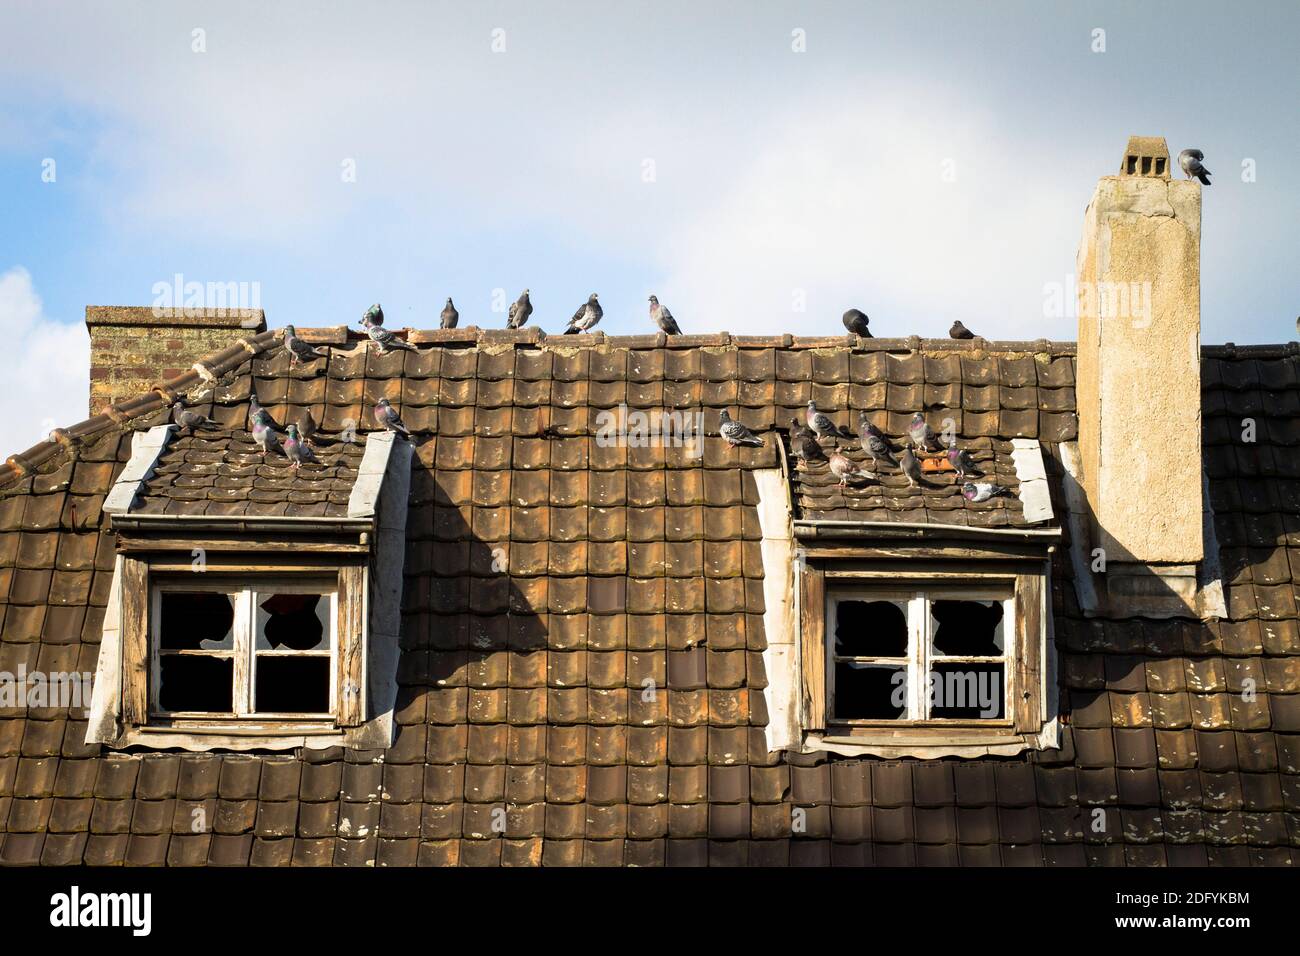 pigeons on a roof of an old abandoned harbor building in the port Deutz, Cologne, Germany. Stock Photo